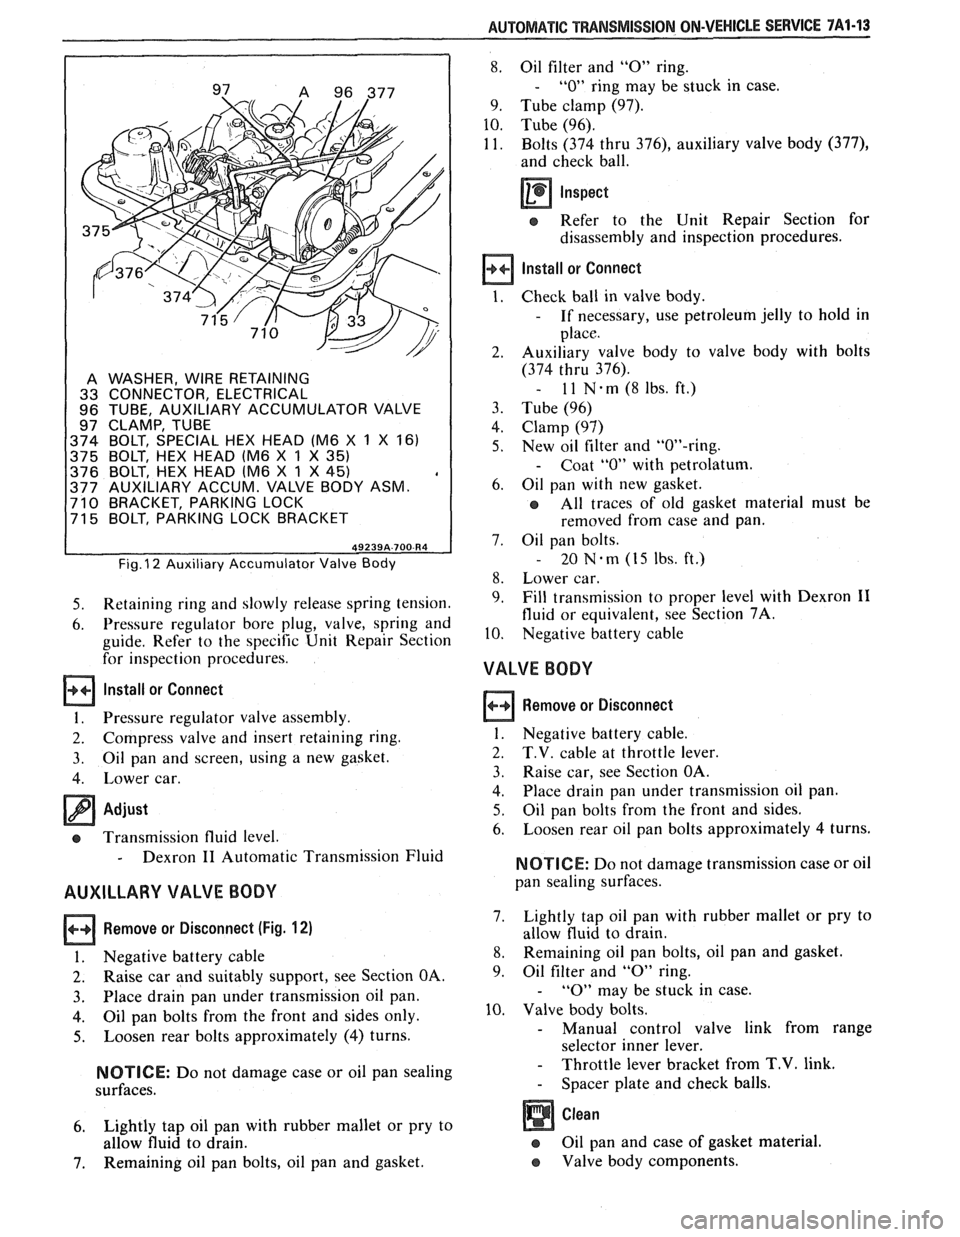 PONTIAC FIERO 1988  Service Repair Manual 
AUTOMATIC TRANSMISSION ON-VEHICLE SERVICE 7A1-13 
A WASHER, WIRE RETAINING 
33  CONNECTOR,  ELECTRICAL 
96  TUBE,  AUXILIARY  ACCUMULATOR  VALVE 
97  CLAMP,  TUBE 
374  BOLT,  SPECIAL  HEX  HEAD (M6 